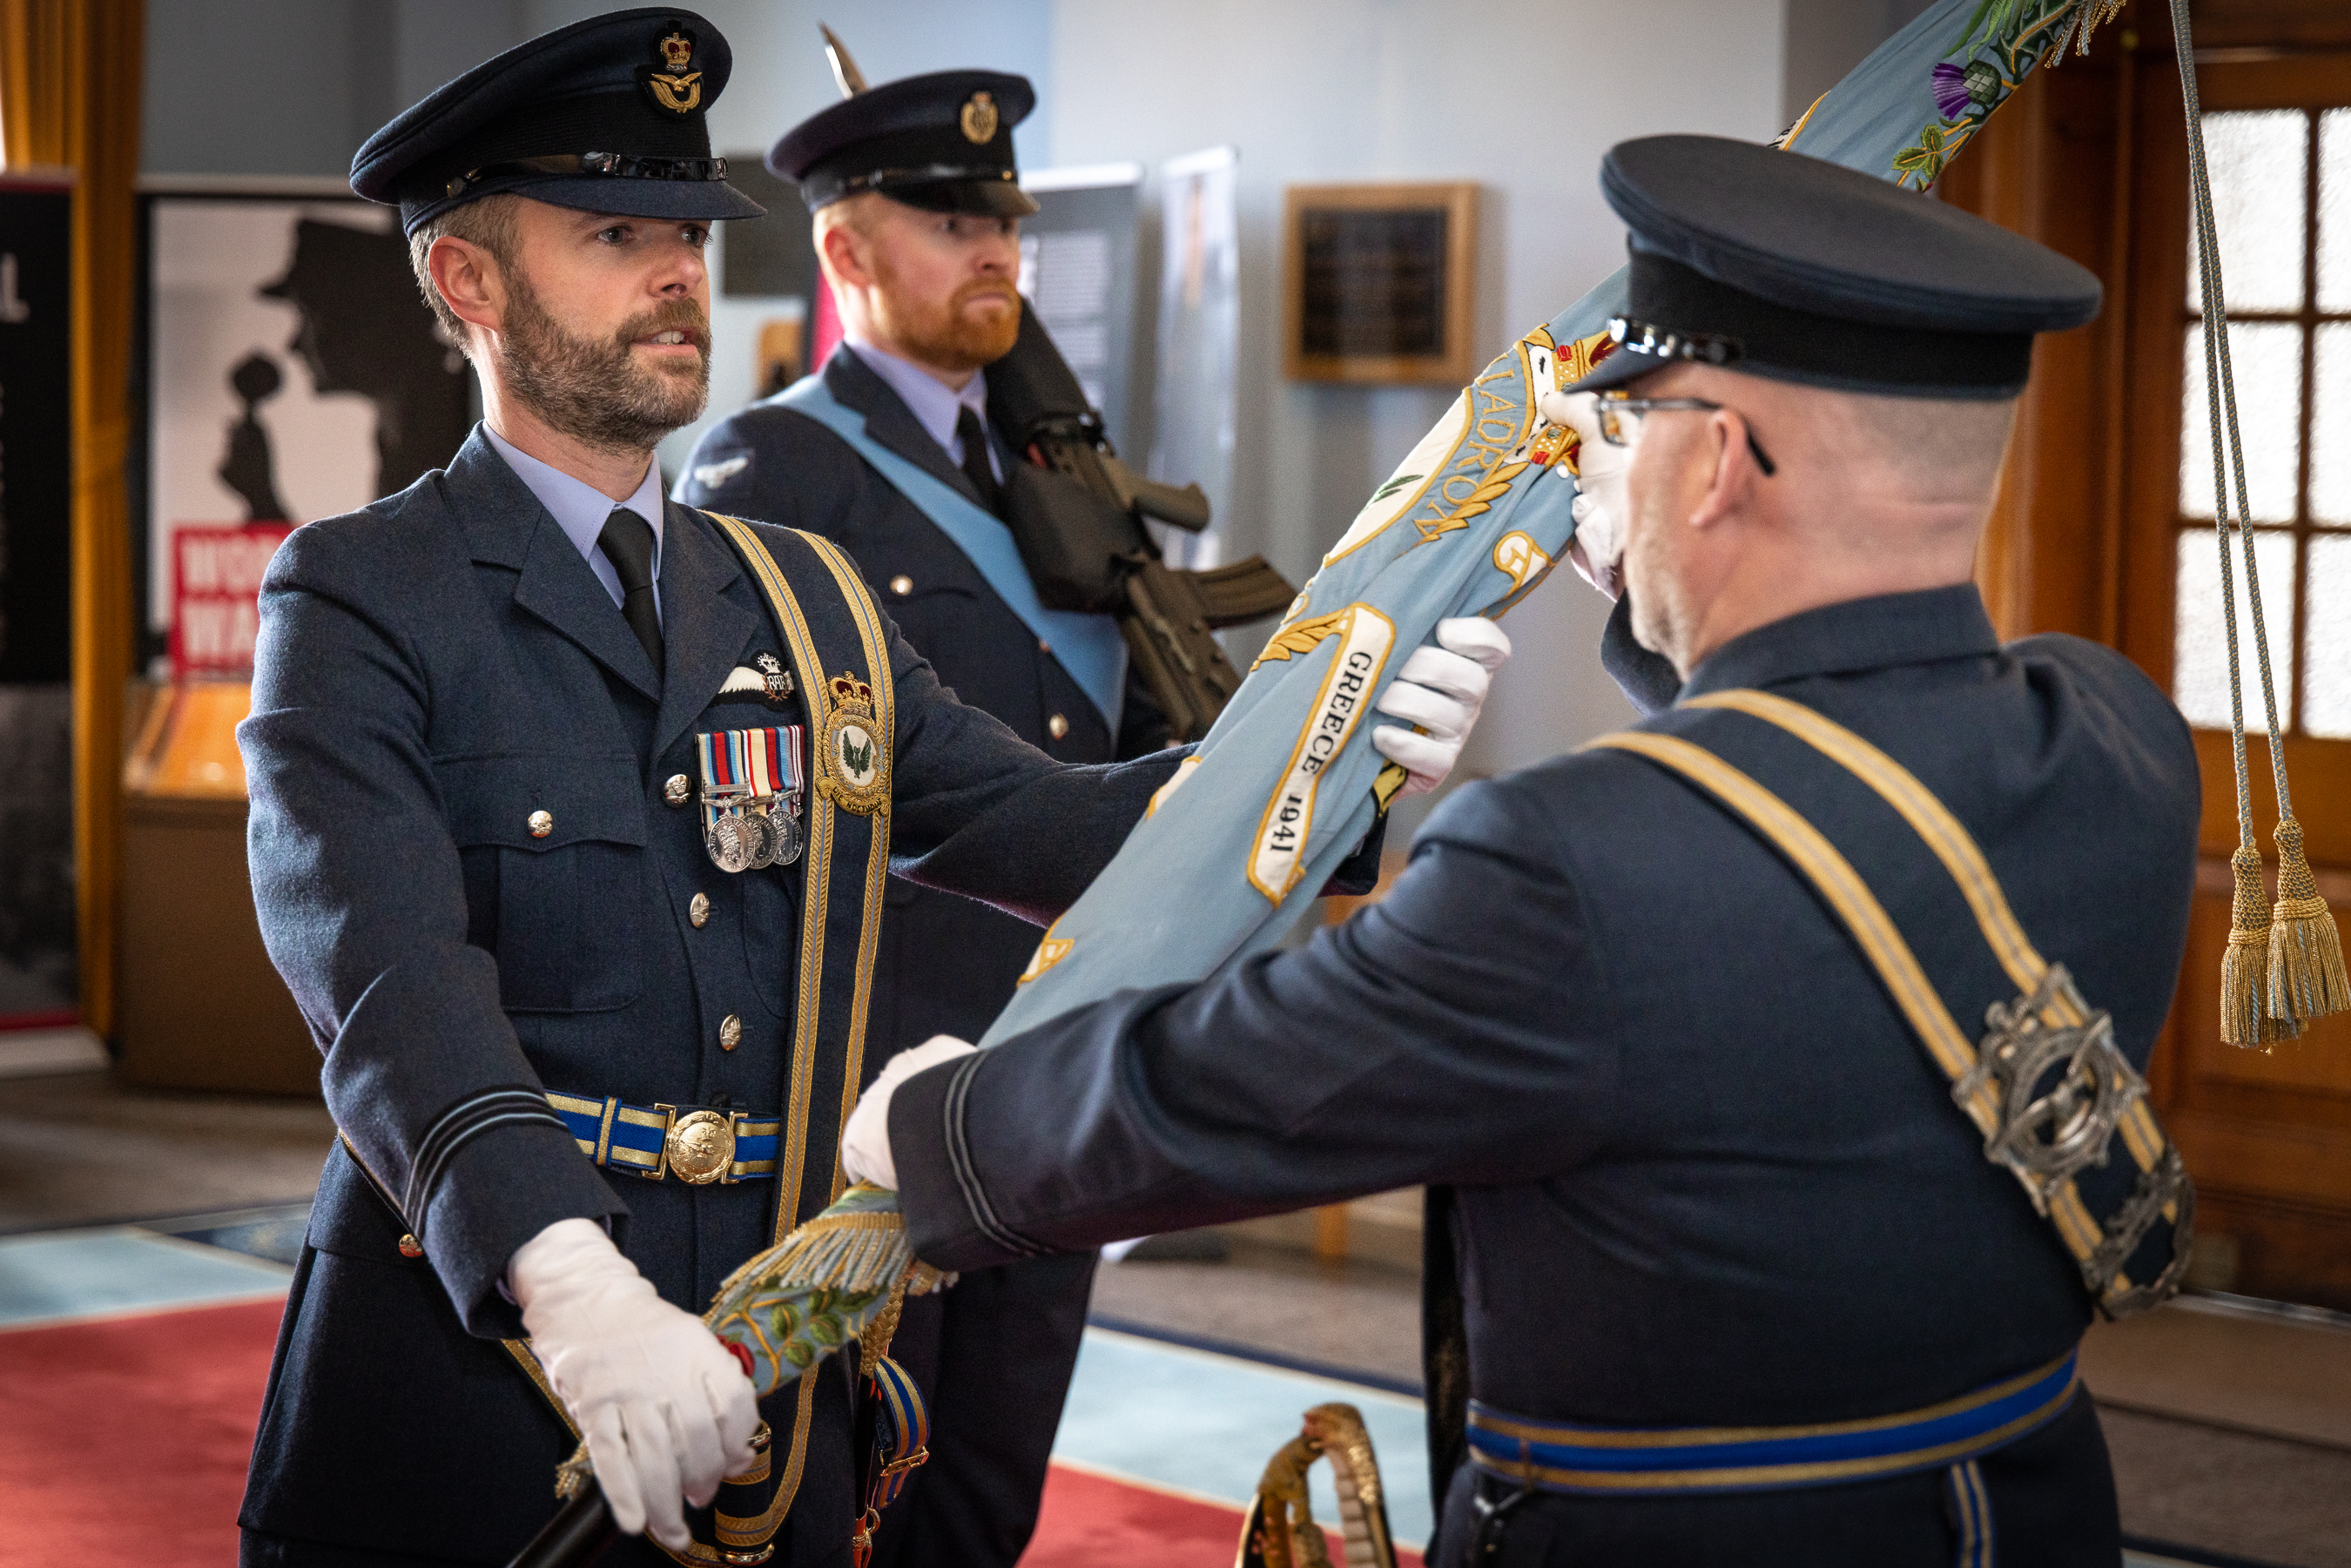 Image shows RAF aviators holding colour standard inside Officers' Mess during ceremony.